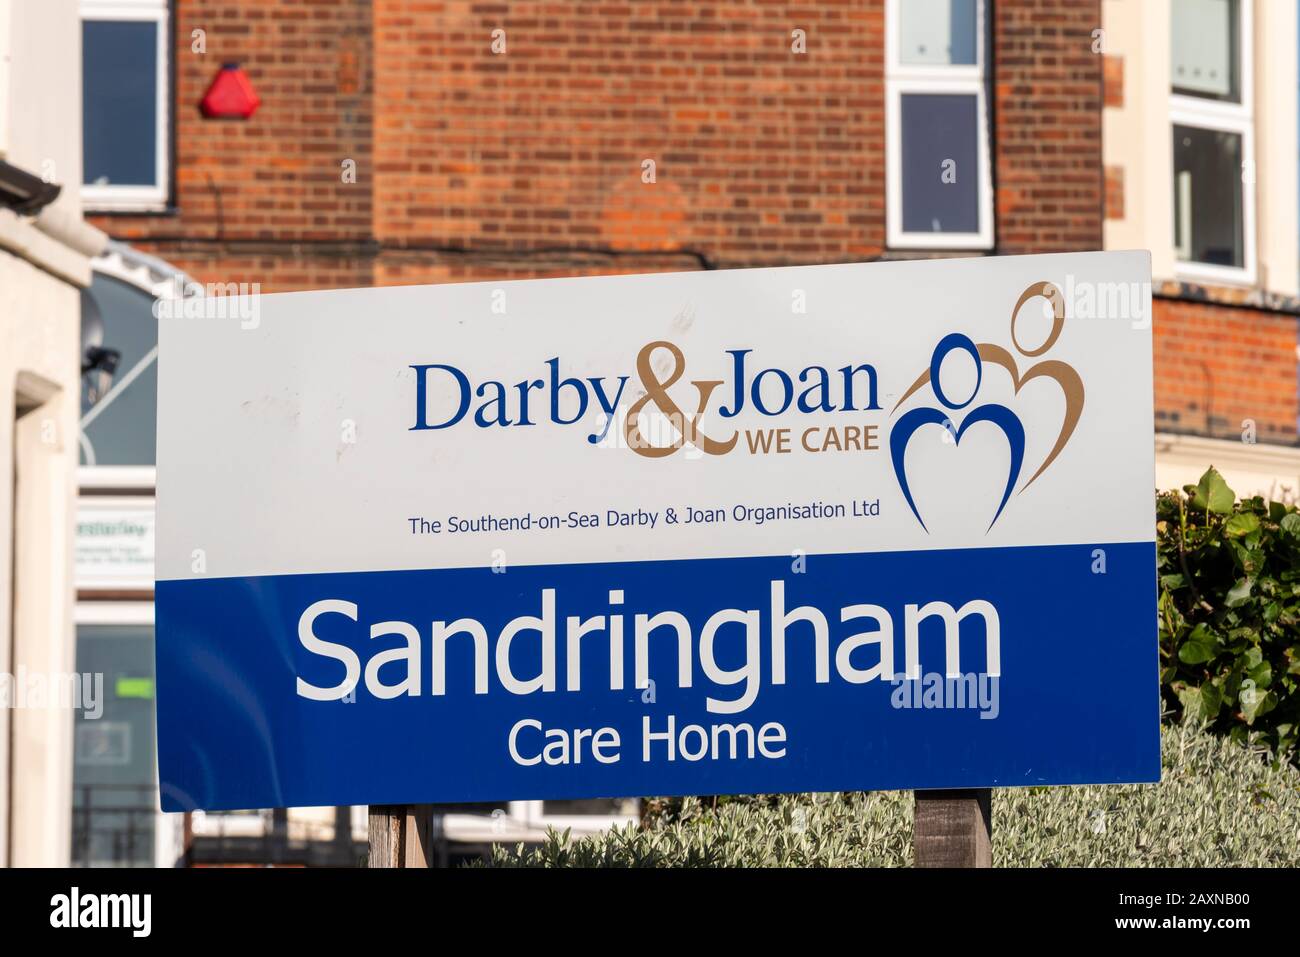 Sandringham Care Home, Darby & Joan, The Southend on Sea, Darby & Joan Organisation Ltd sign. Westcliff on Sea old people's home Stock Photo